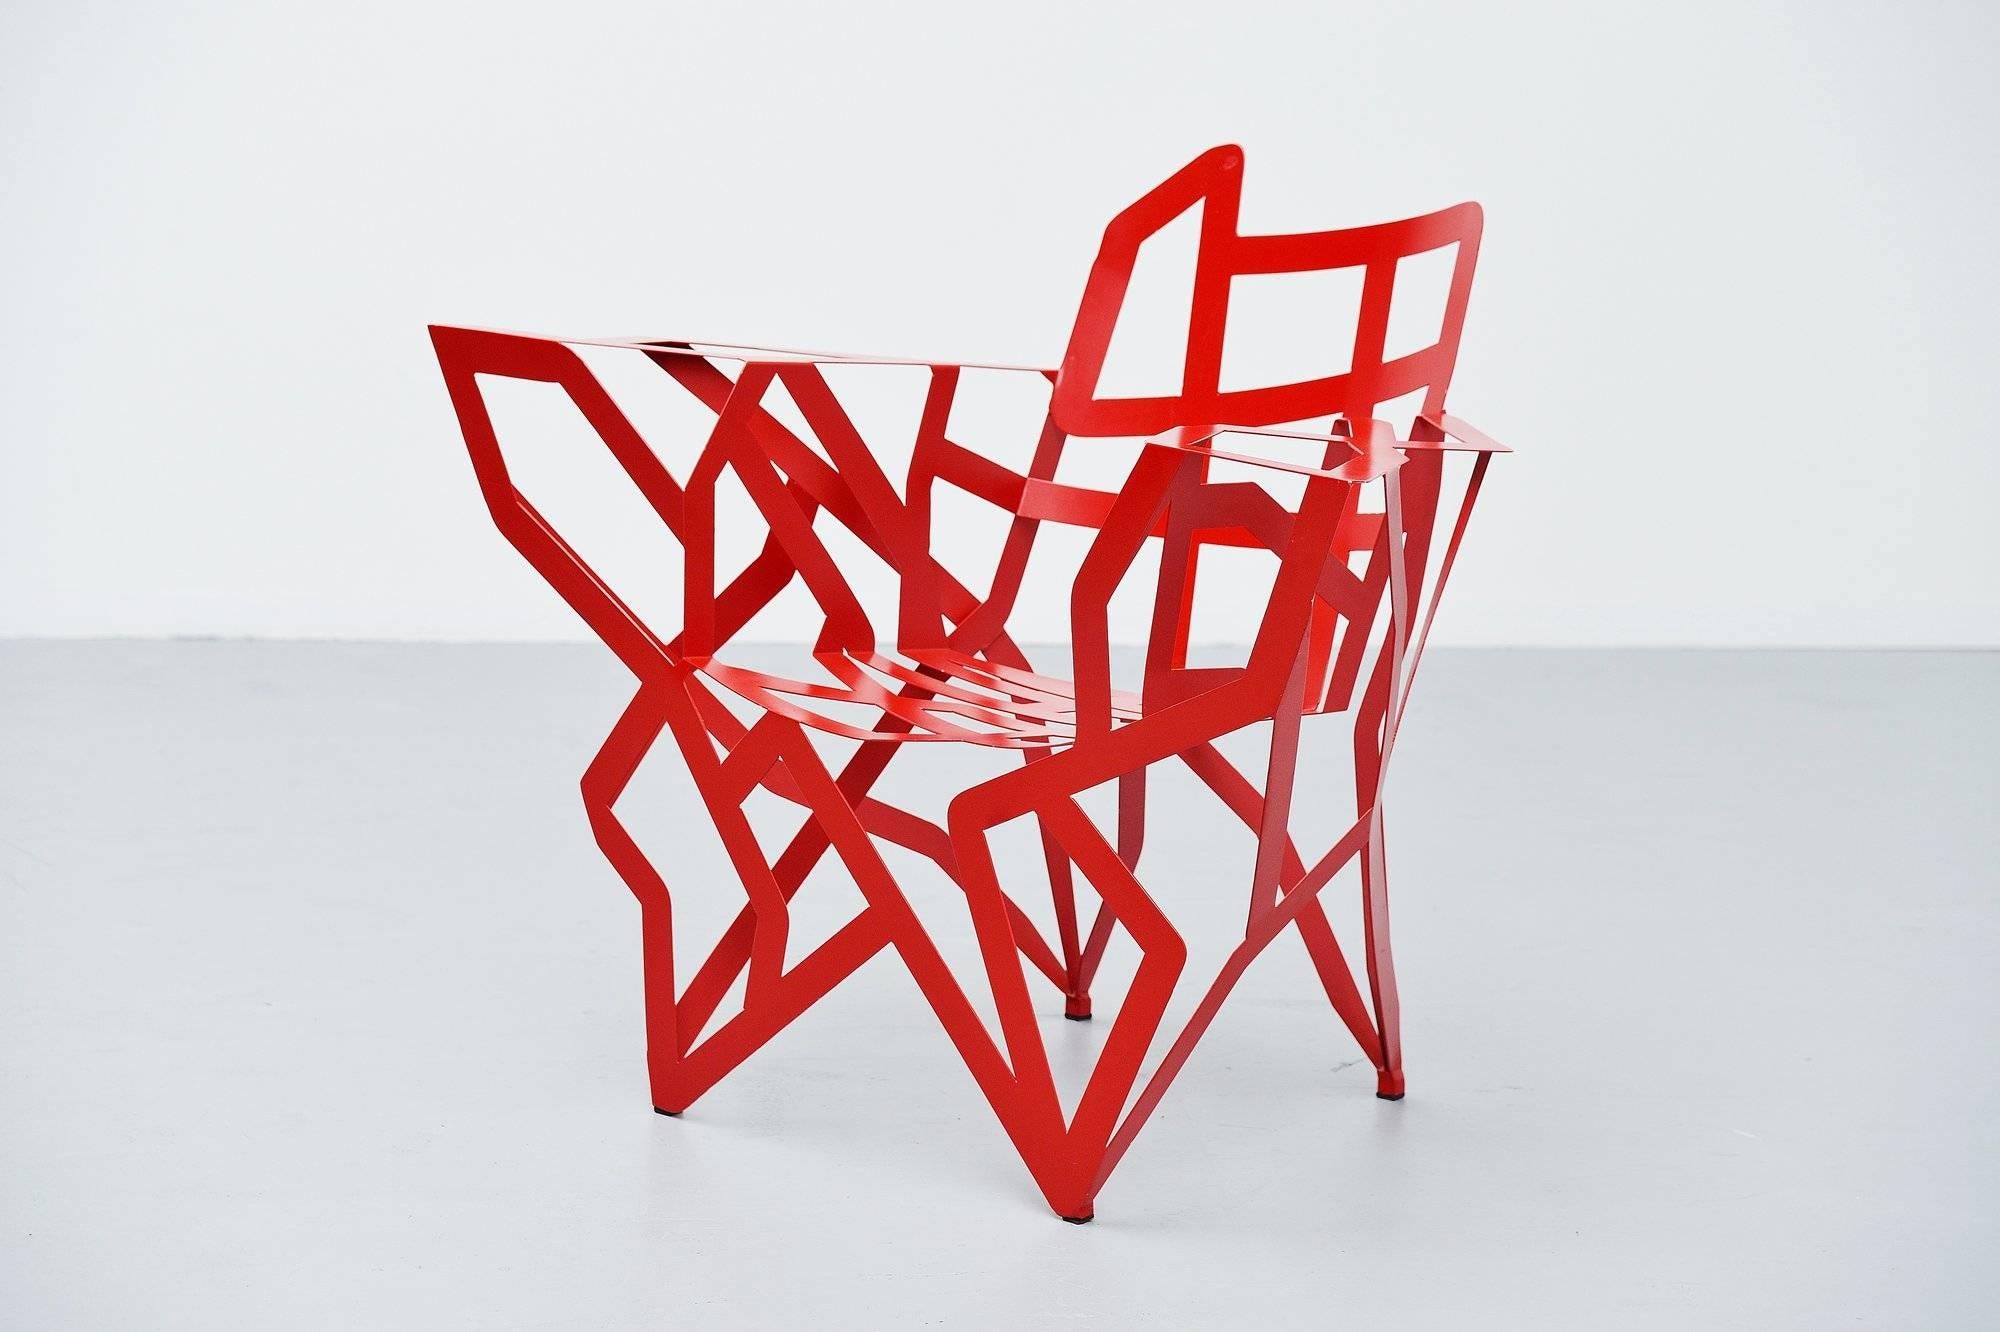 Extraordinary chair designed by Gérard Coquelin, manufactured in his own atelier in France, 1990. The chair is made of red painted metal, completely welded into perfection. Gérard Coquelin was born in 1947 and Since 1980 he designs and makes